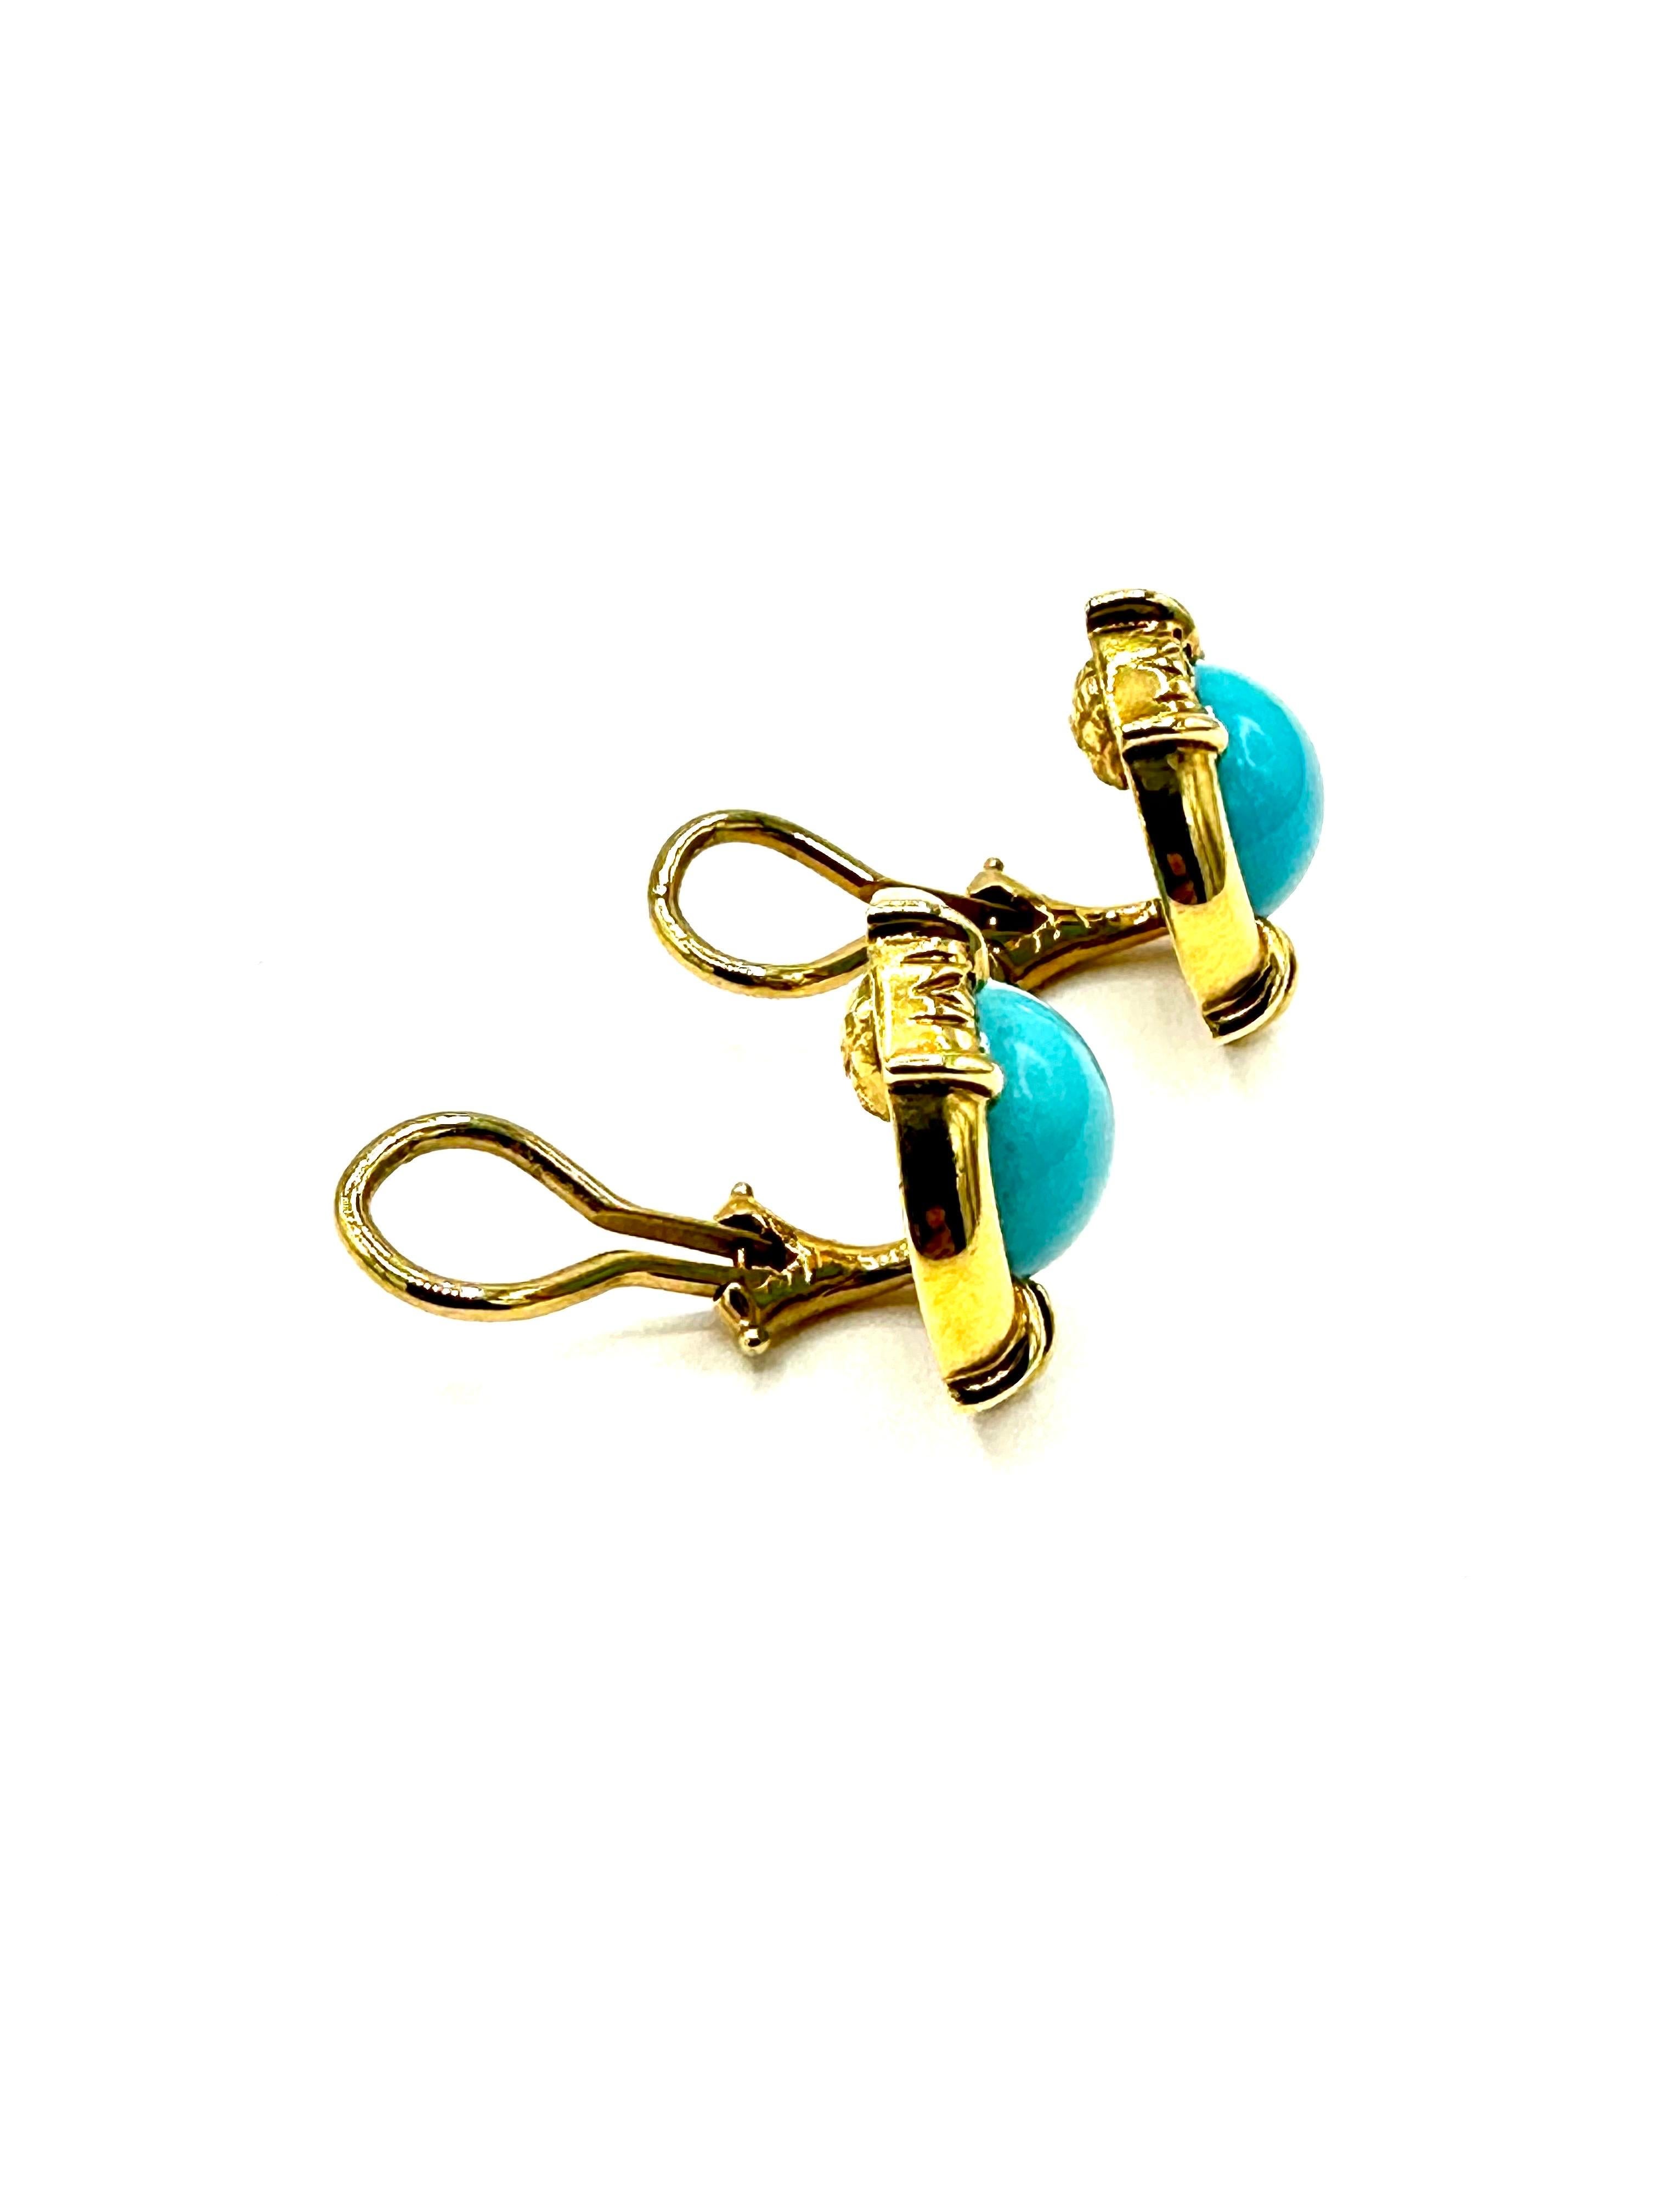 A very simple and easy to wear pair of Tiffany & Co. Turquoise and Diamond earrings!  The earrings have a cabochon cut center Turquoise bezel set in an 18K yellow gold circular frame containing three stations with two round brilliant Diamonds in